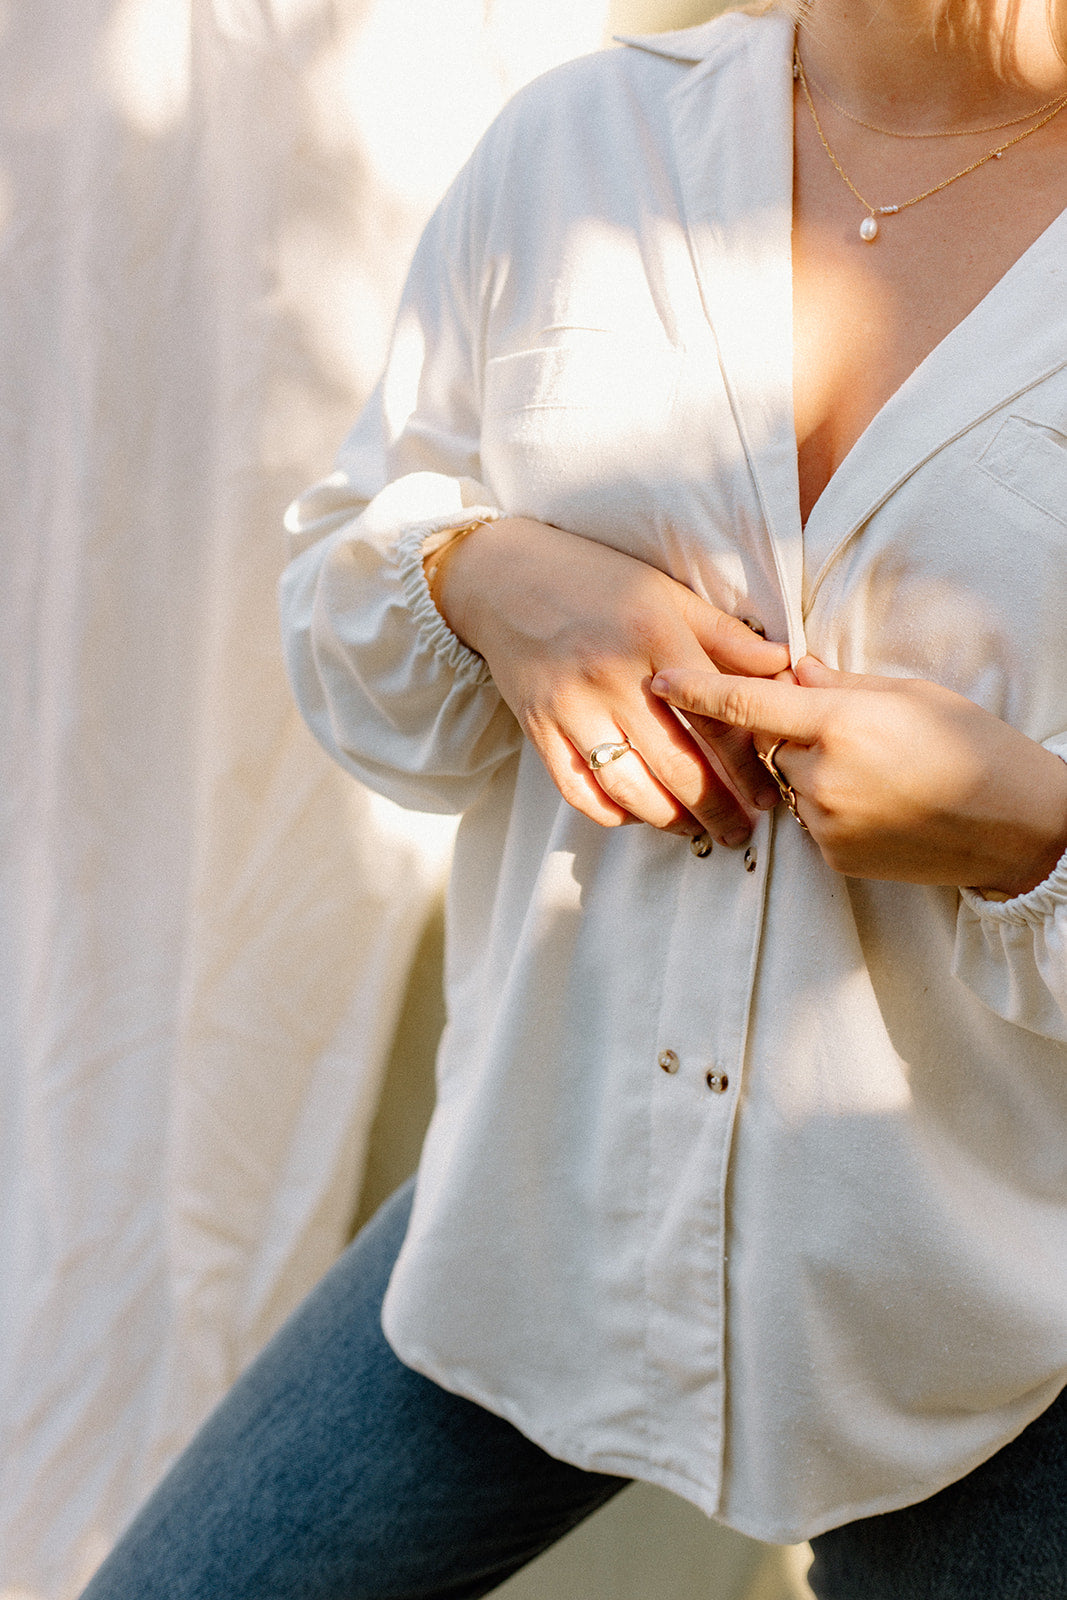 100% raw silk button up blouse made sustainably in B.C., Canada.